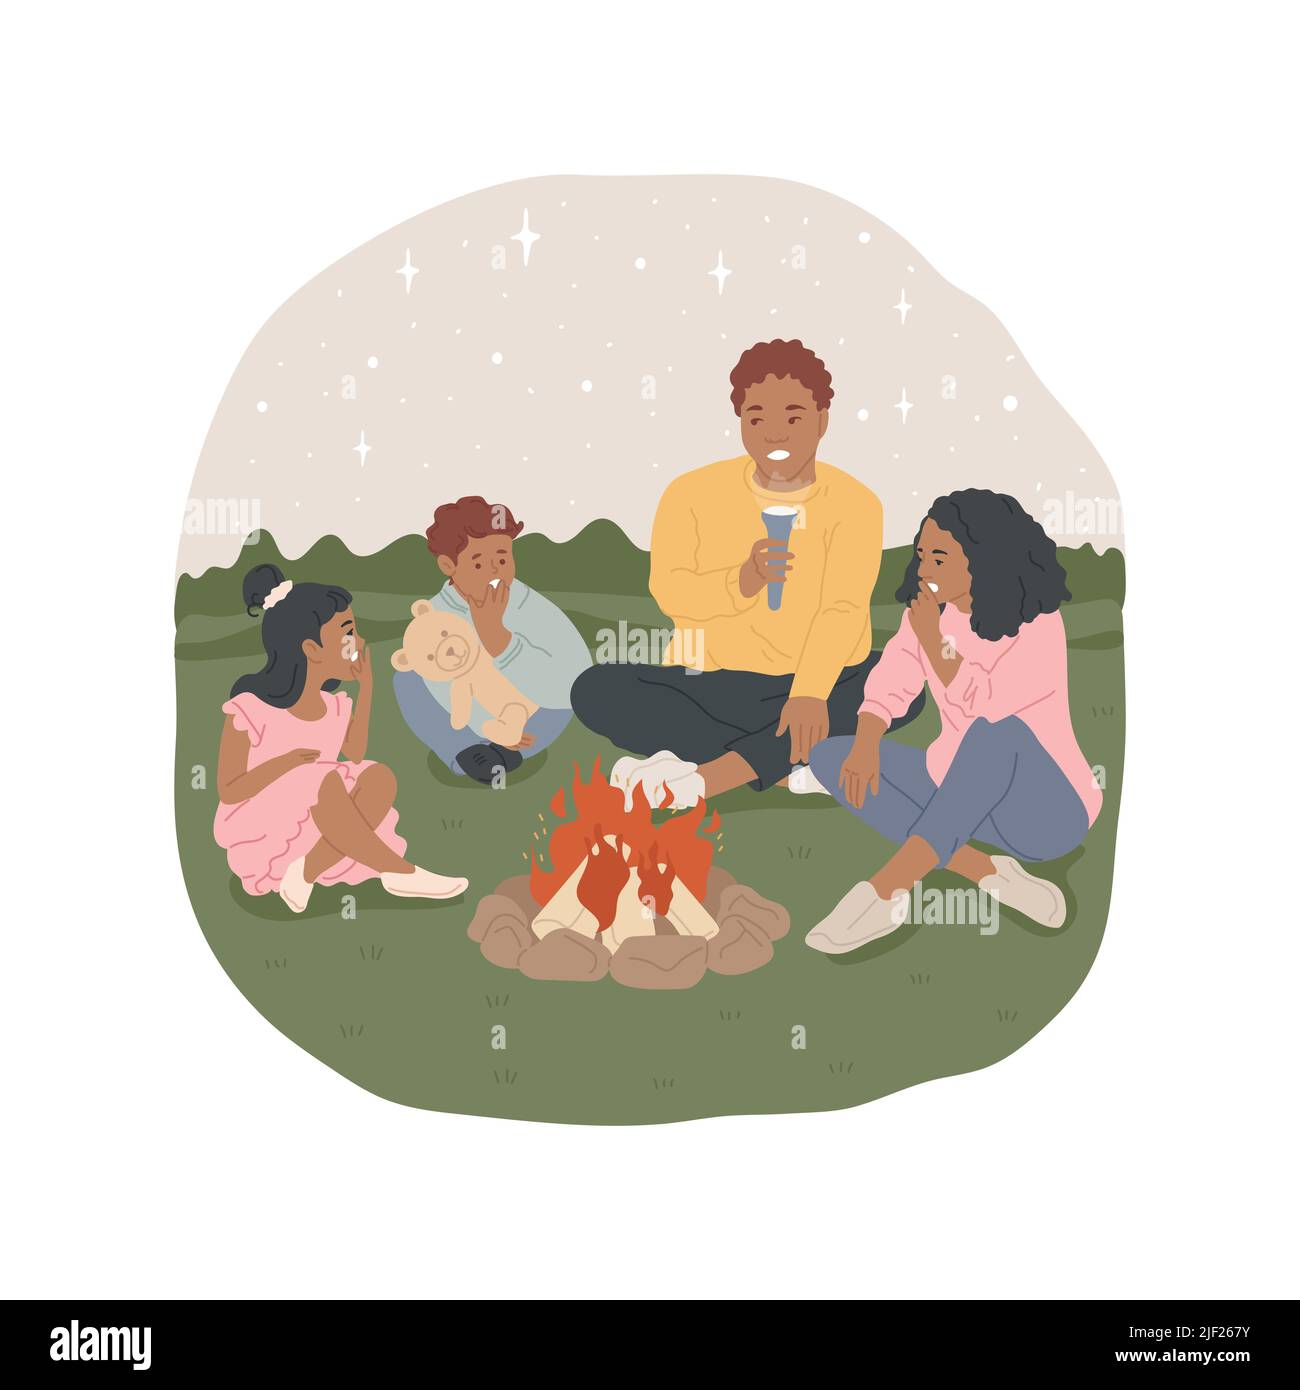 Scary campfire stories isolated cartoon vector illustration. Camping in the nature, campfire fun, father telling scary story to children, family spending night near bonfire vector cartoon. Stock Vector